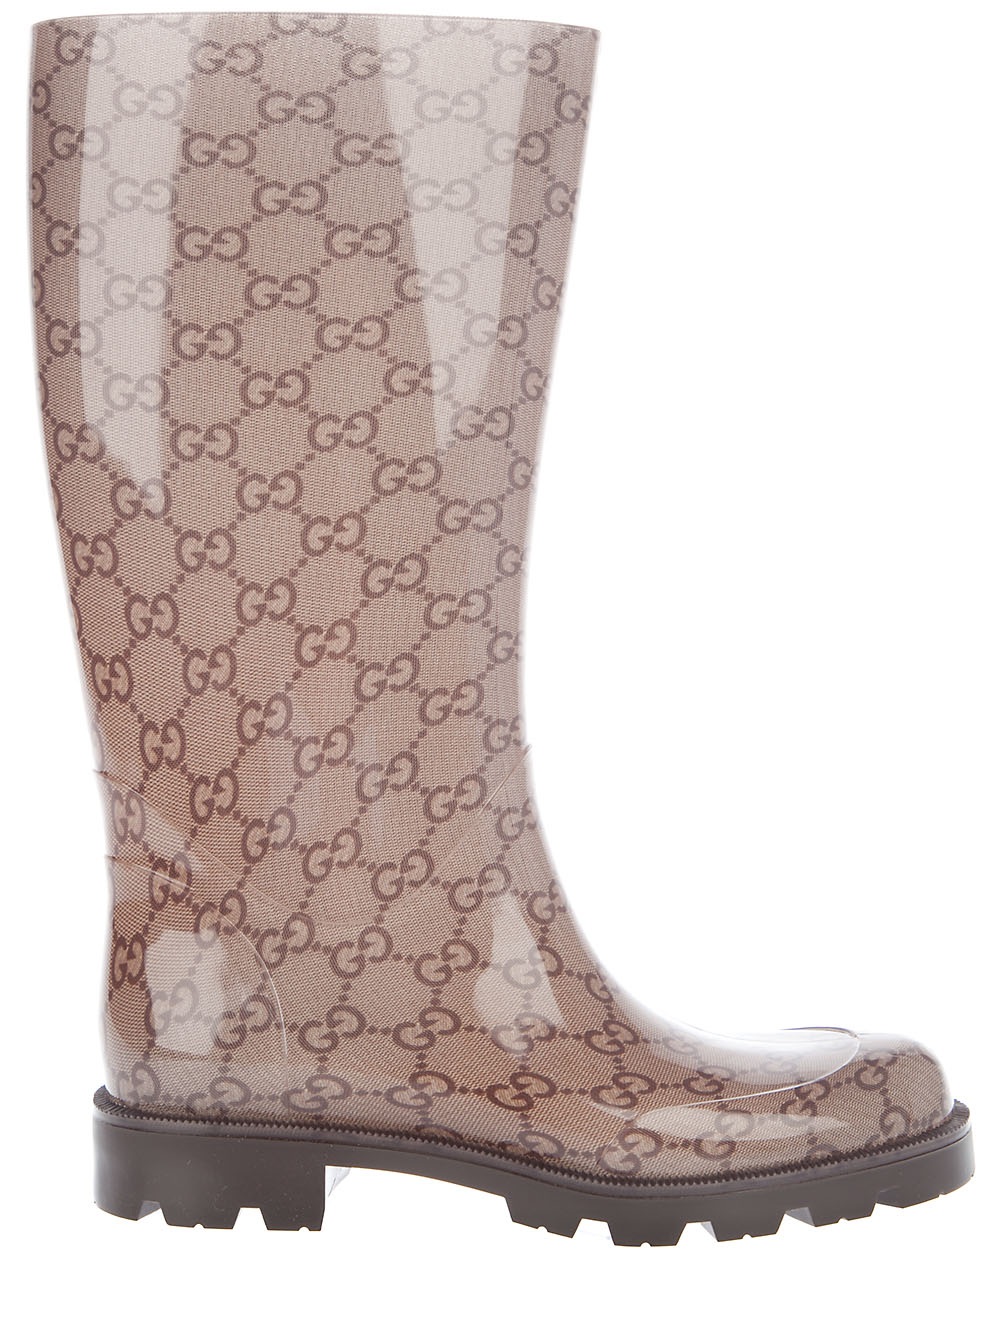 Gucci Monogrammed Wellies in Brown - Lyst